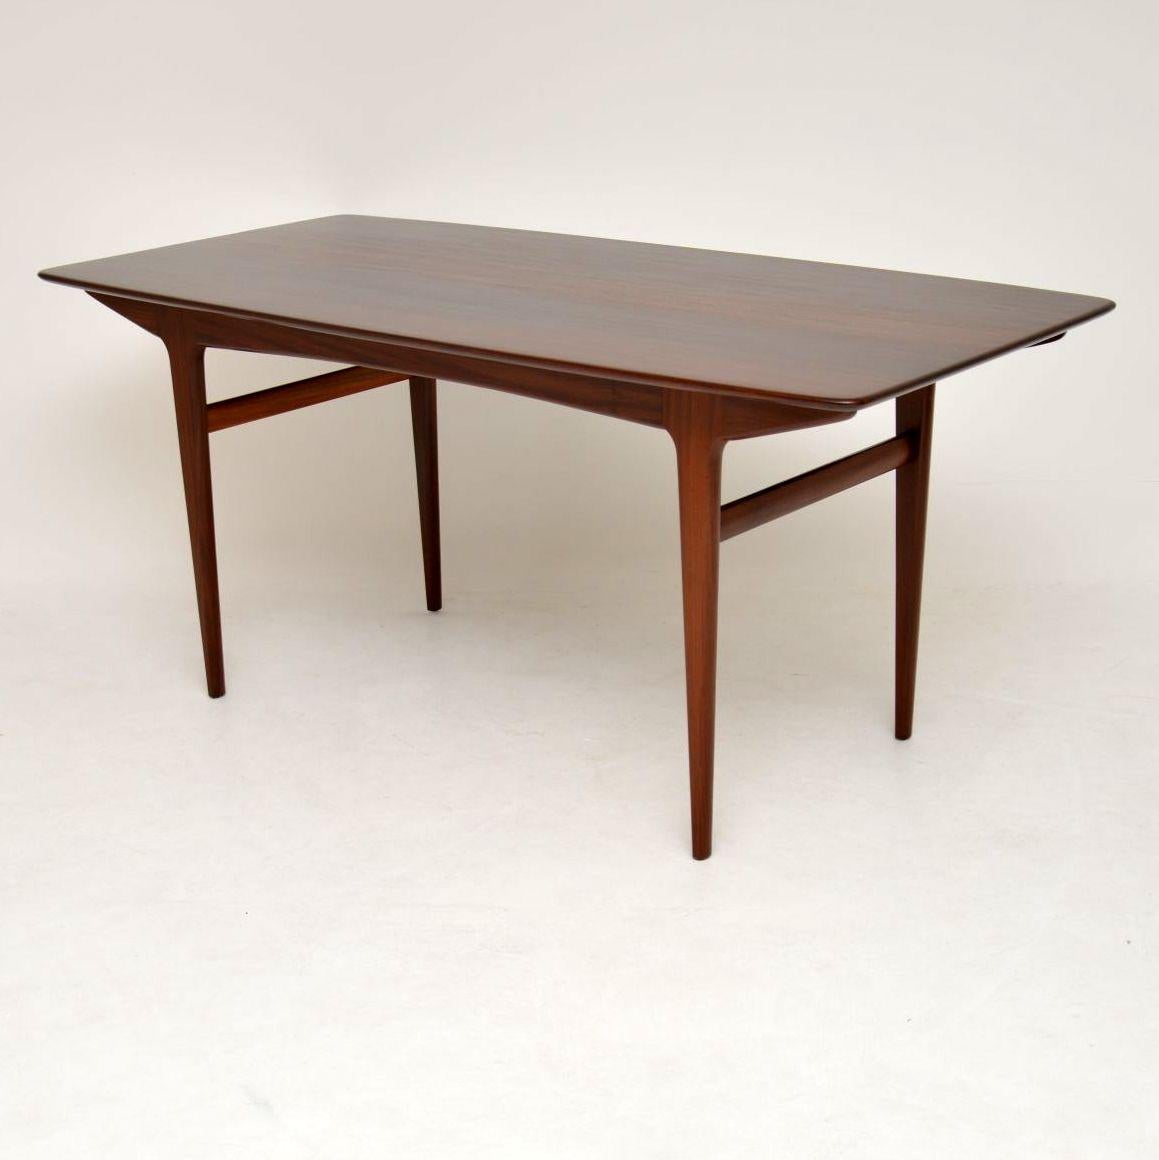 English 1950s Vintage Afromosia Dining Table by Younger